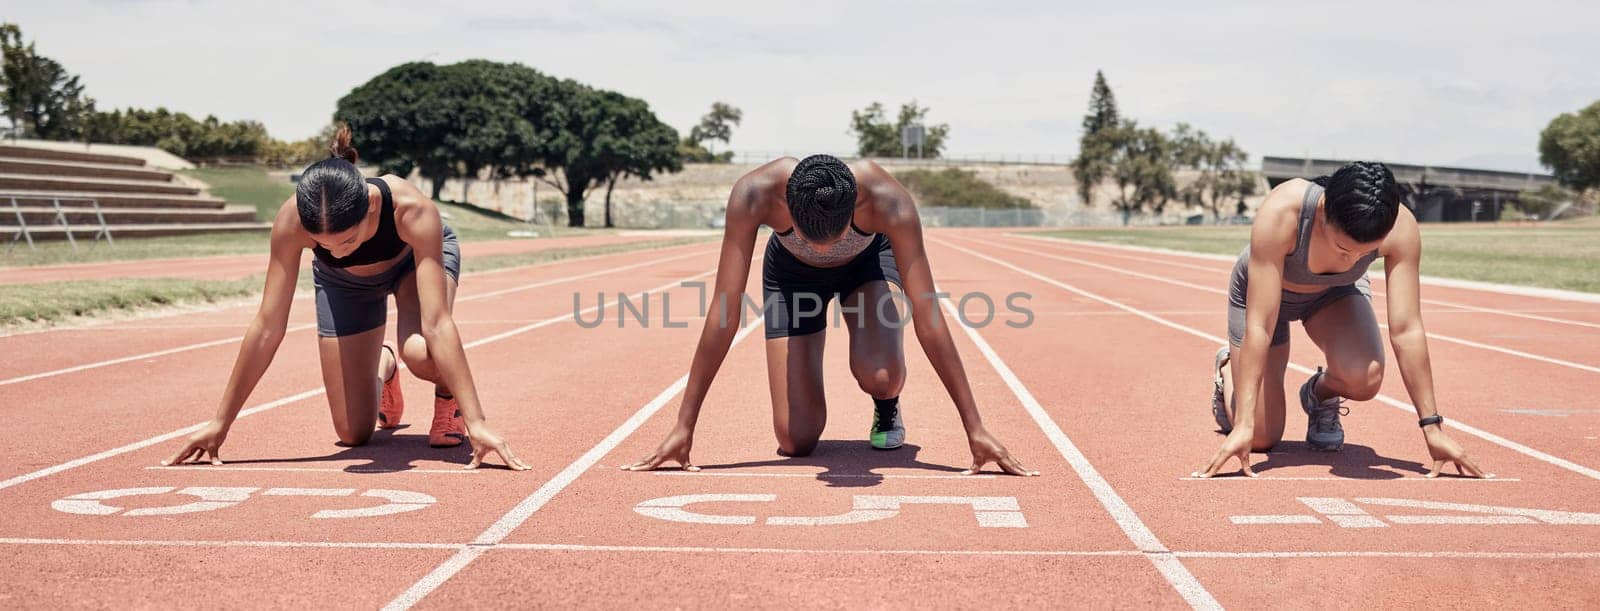 Race track, start and sports people at stadium for marathon competition, event and running with focus, energy and goal. Athlete or runner on field ground ready for speed contest or fitness challenge.